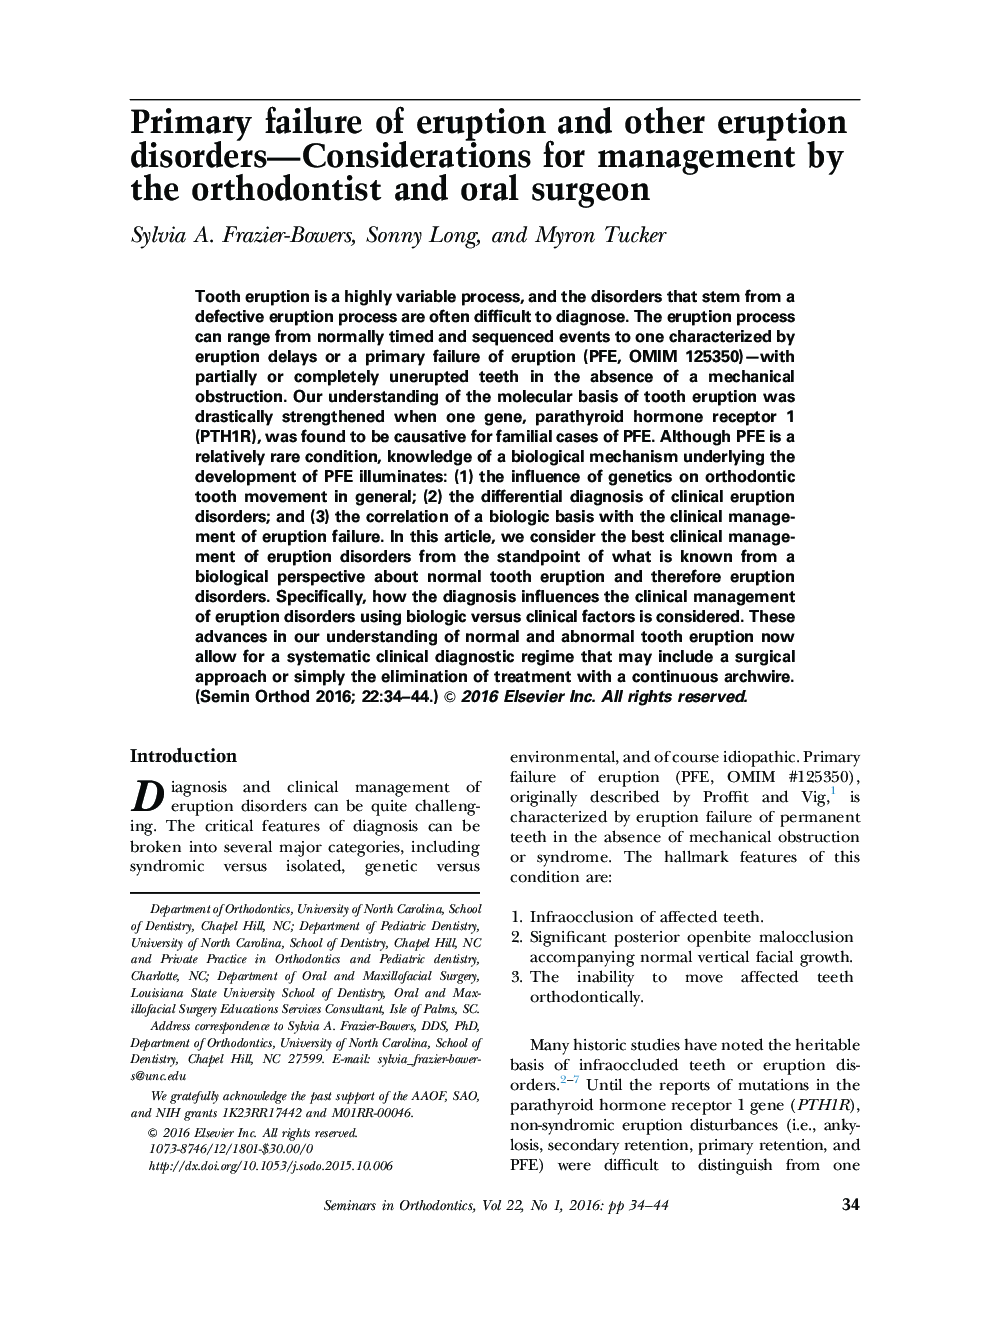 Primary failure of eruption and other eruption disorders—Considerations for management by the orthodontist and oral surgeon 